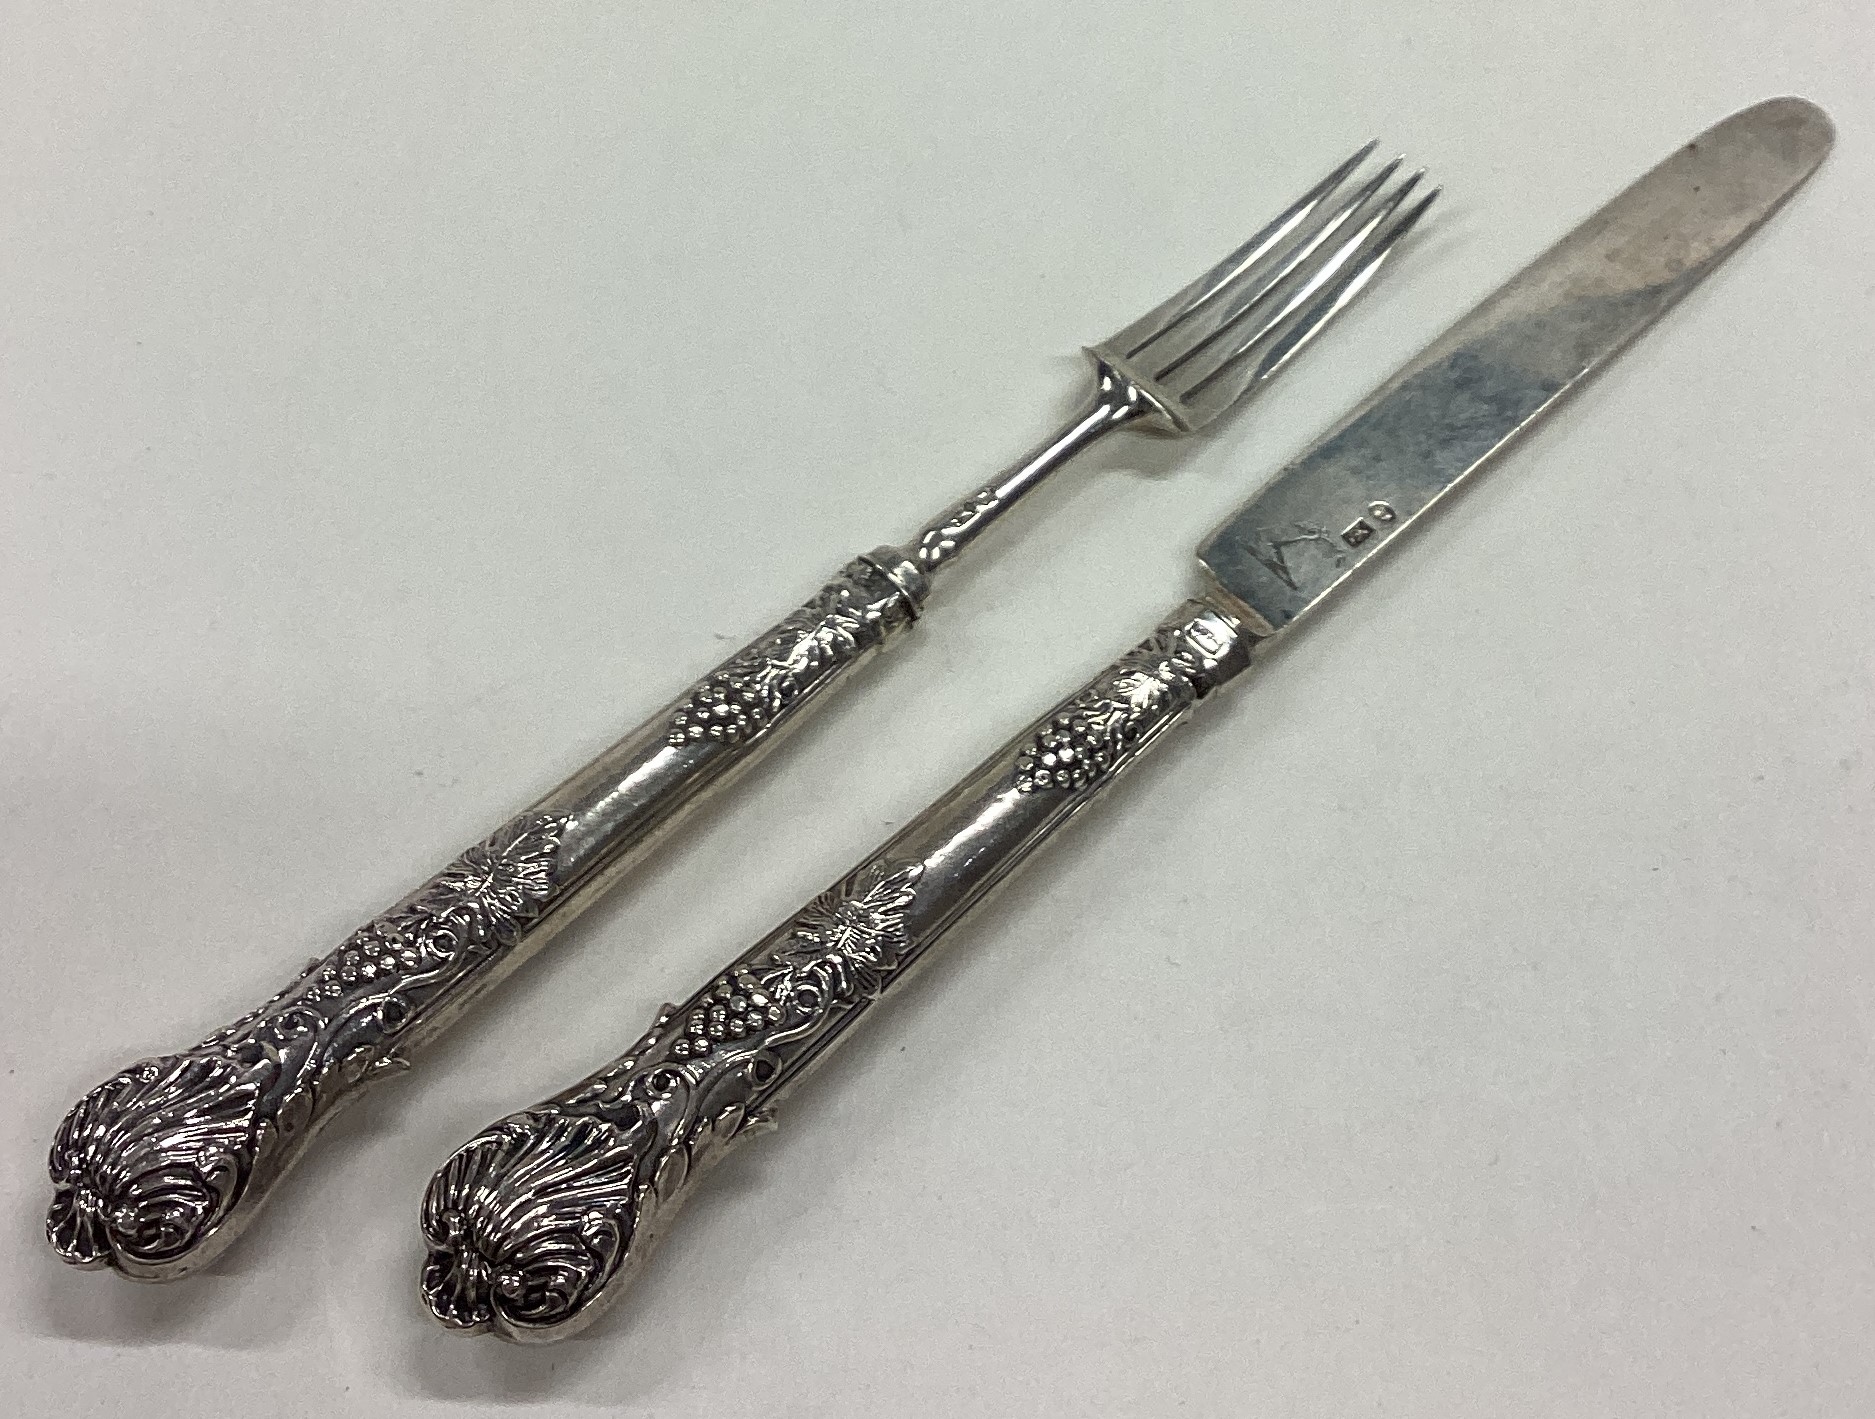 A crested William IV silver knife and fork set.